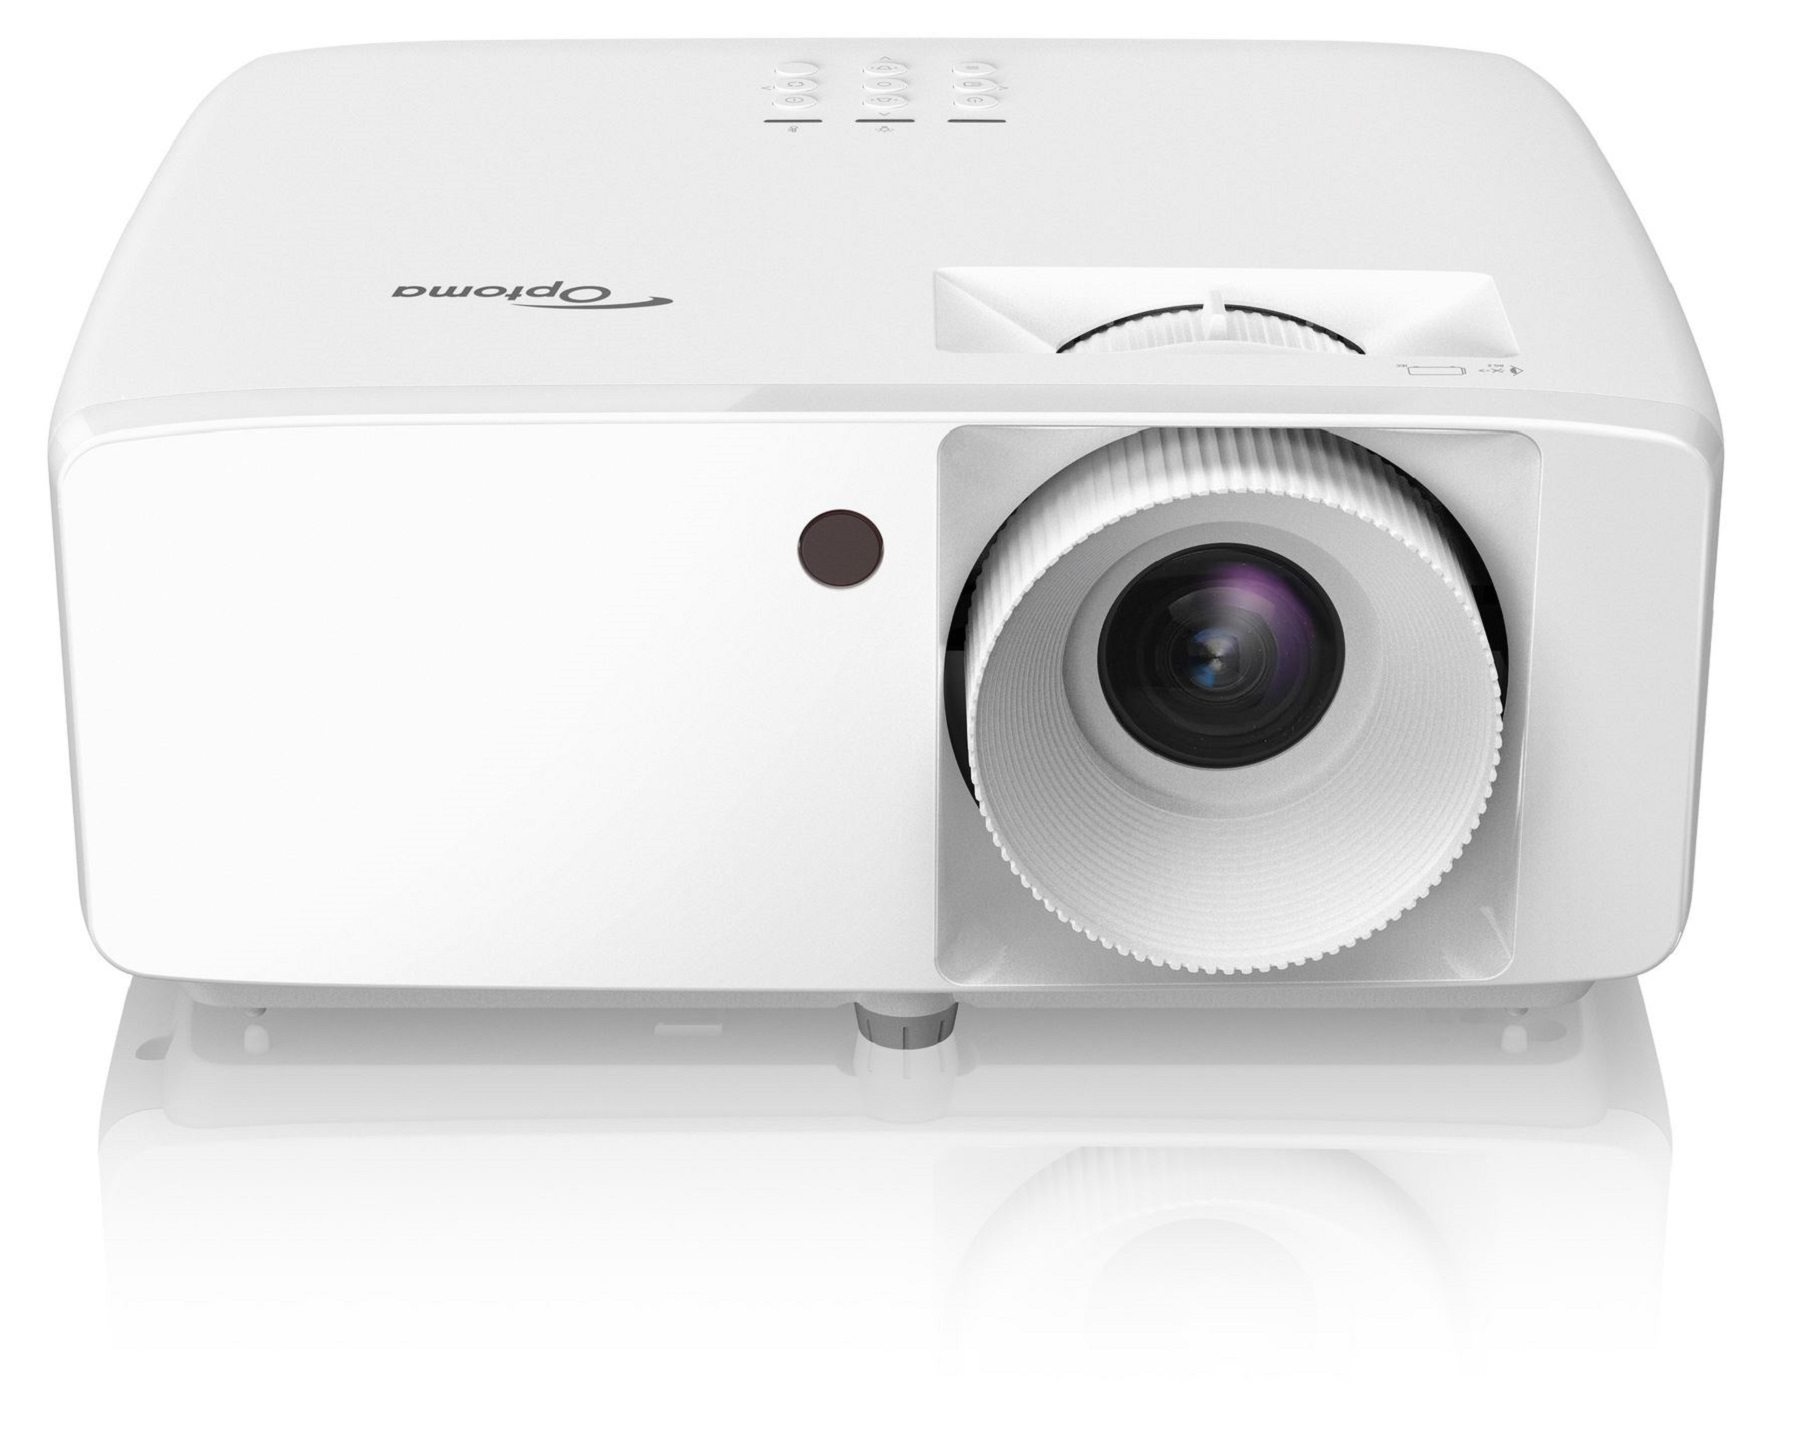 Optoma ZW350e Projector Delivers High Performance in Lightweight, Compact Size